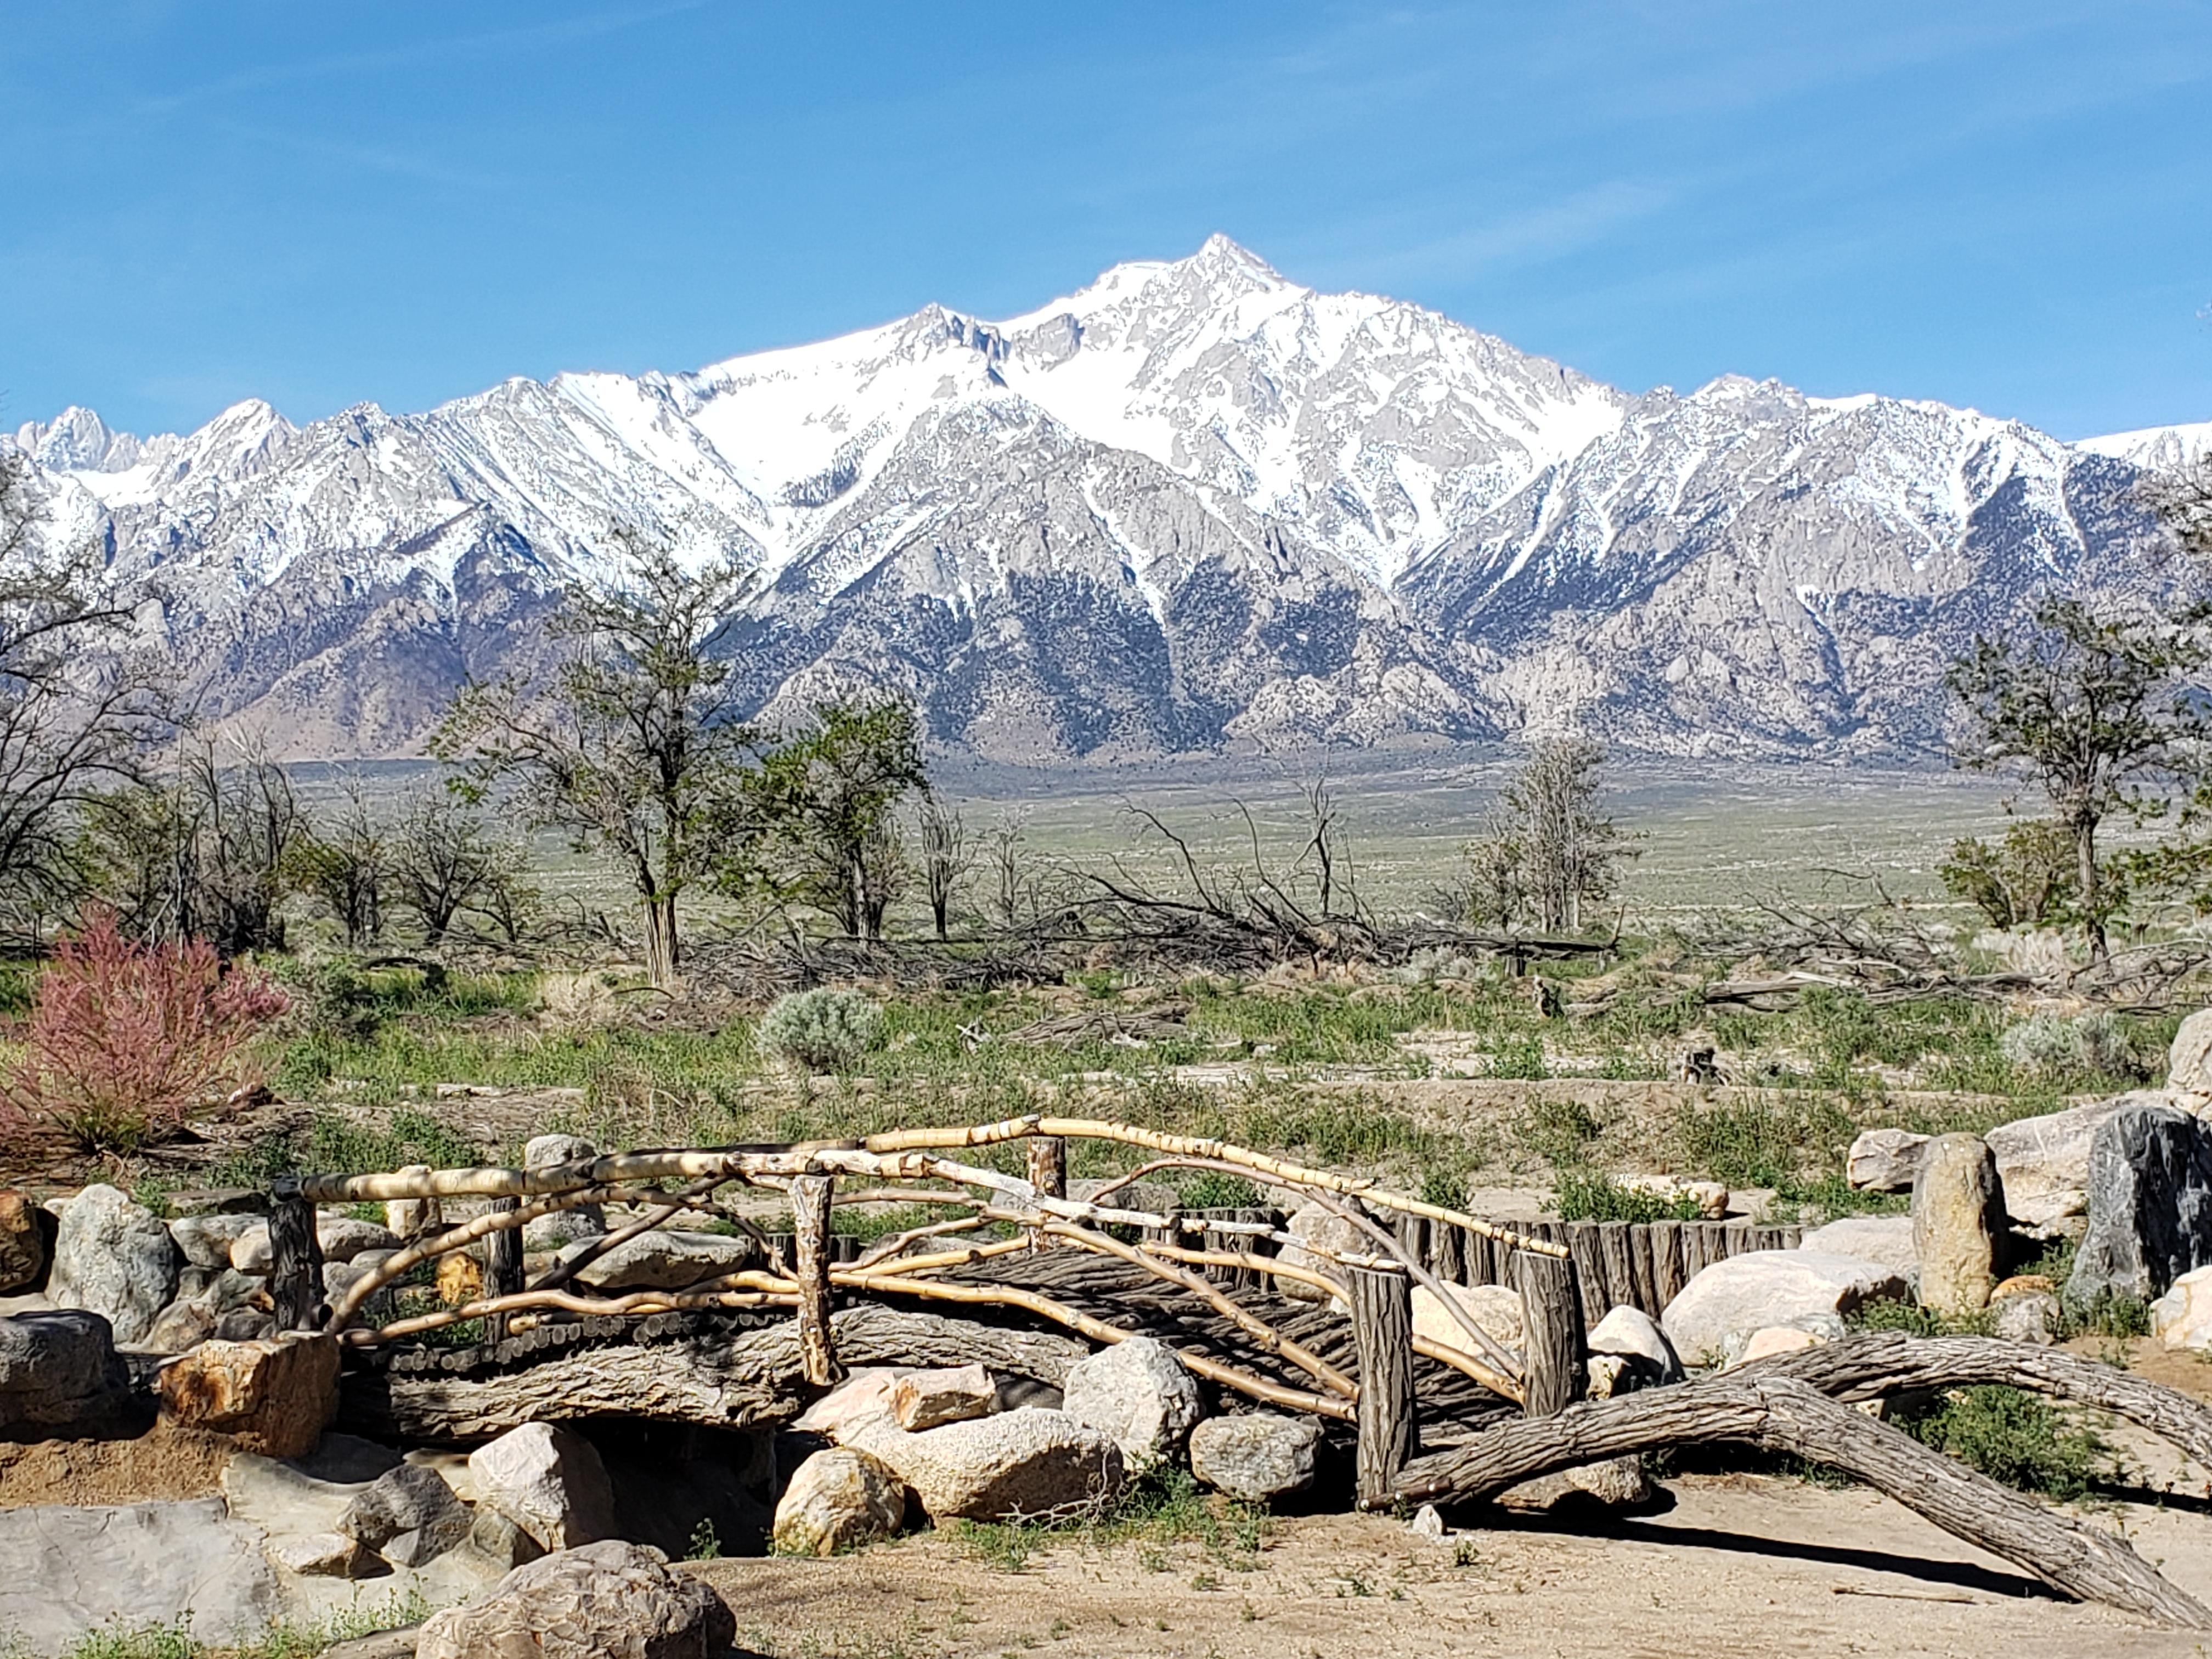 wooden bridge and stonework in foreground with mountains behind